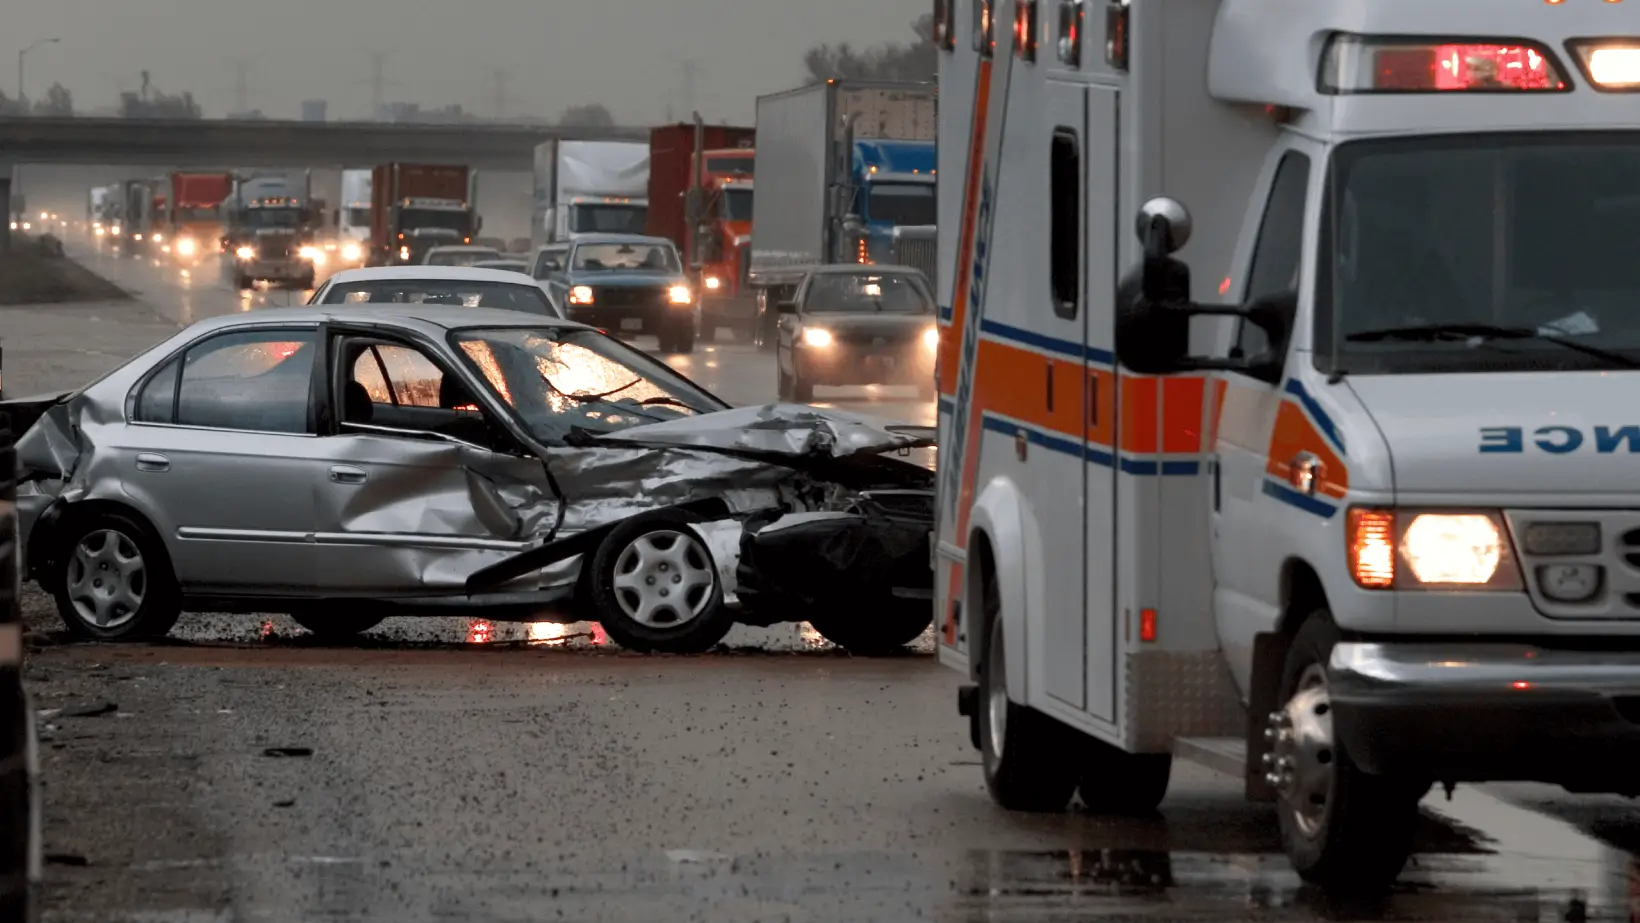 Collisions involving a Police Car, Firetruck or Ambulance